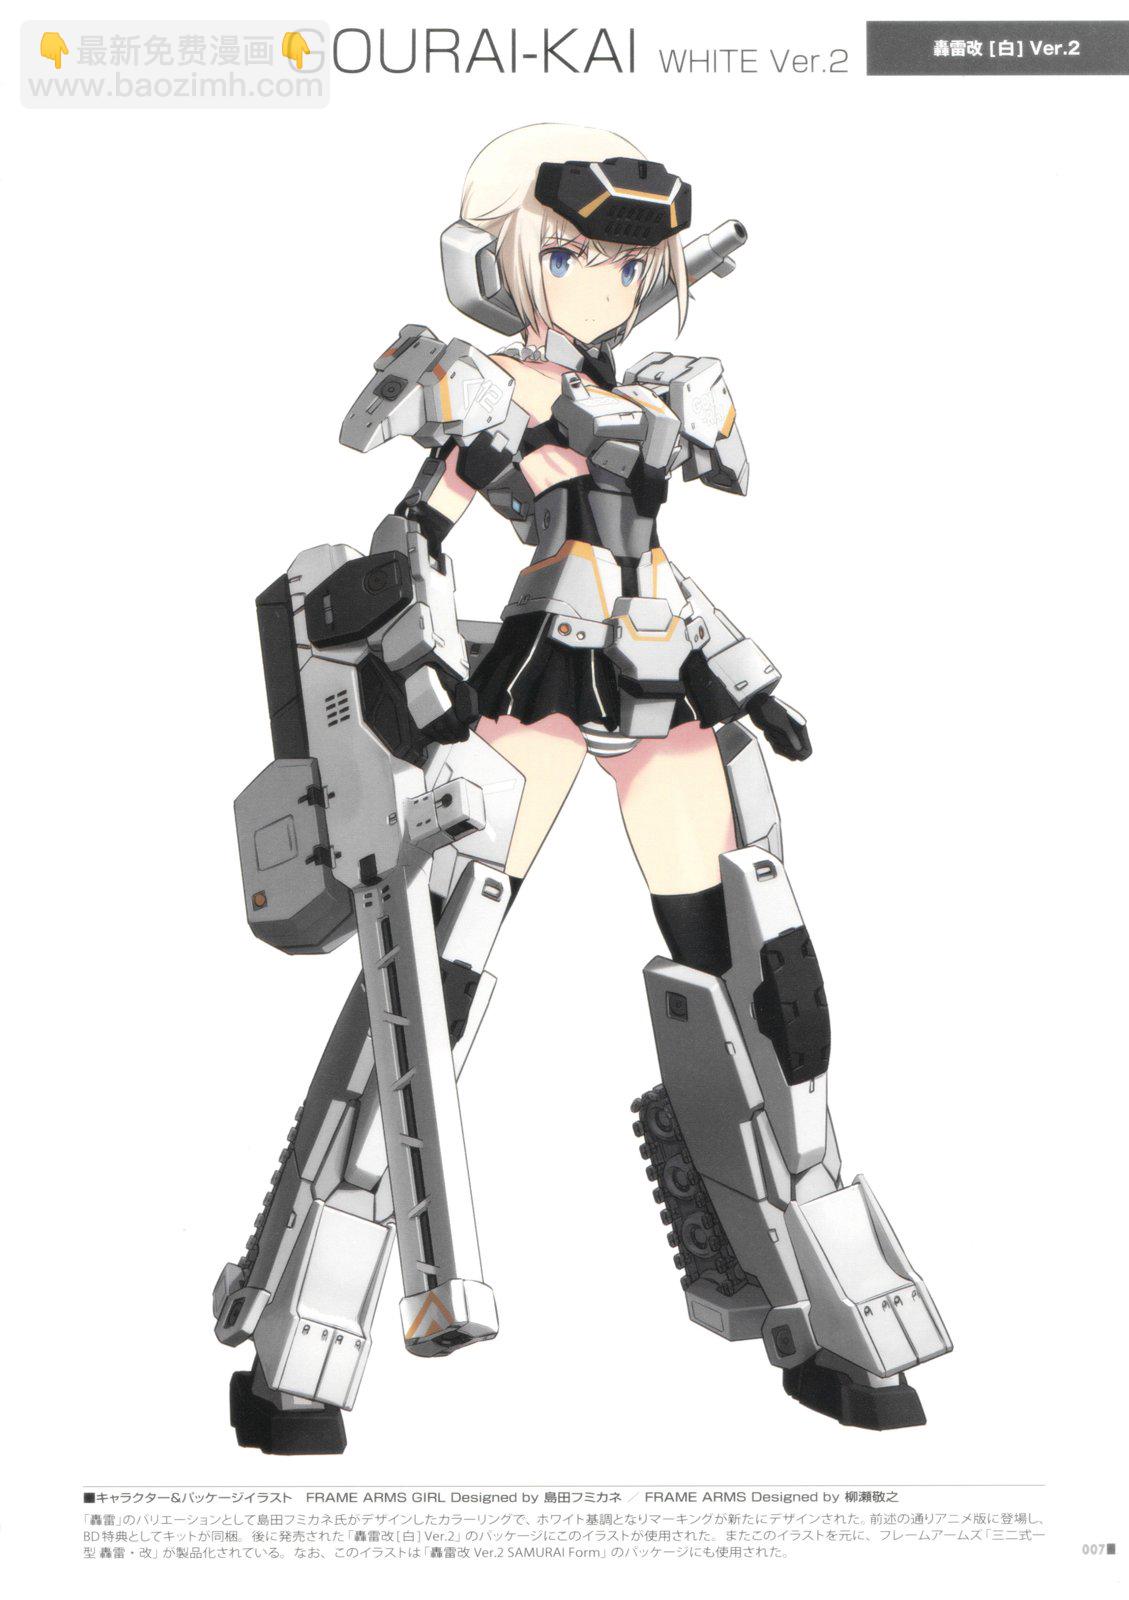 FRAME ARMS GIRL DESIGNERS NOTE - 全一卷(1/5) - 6